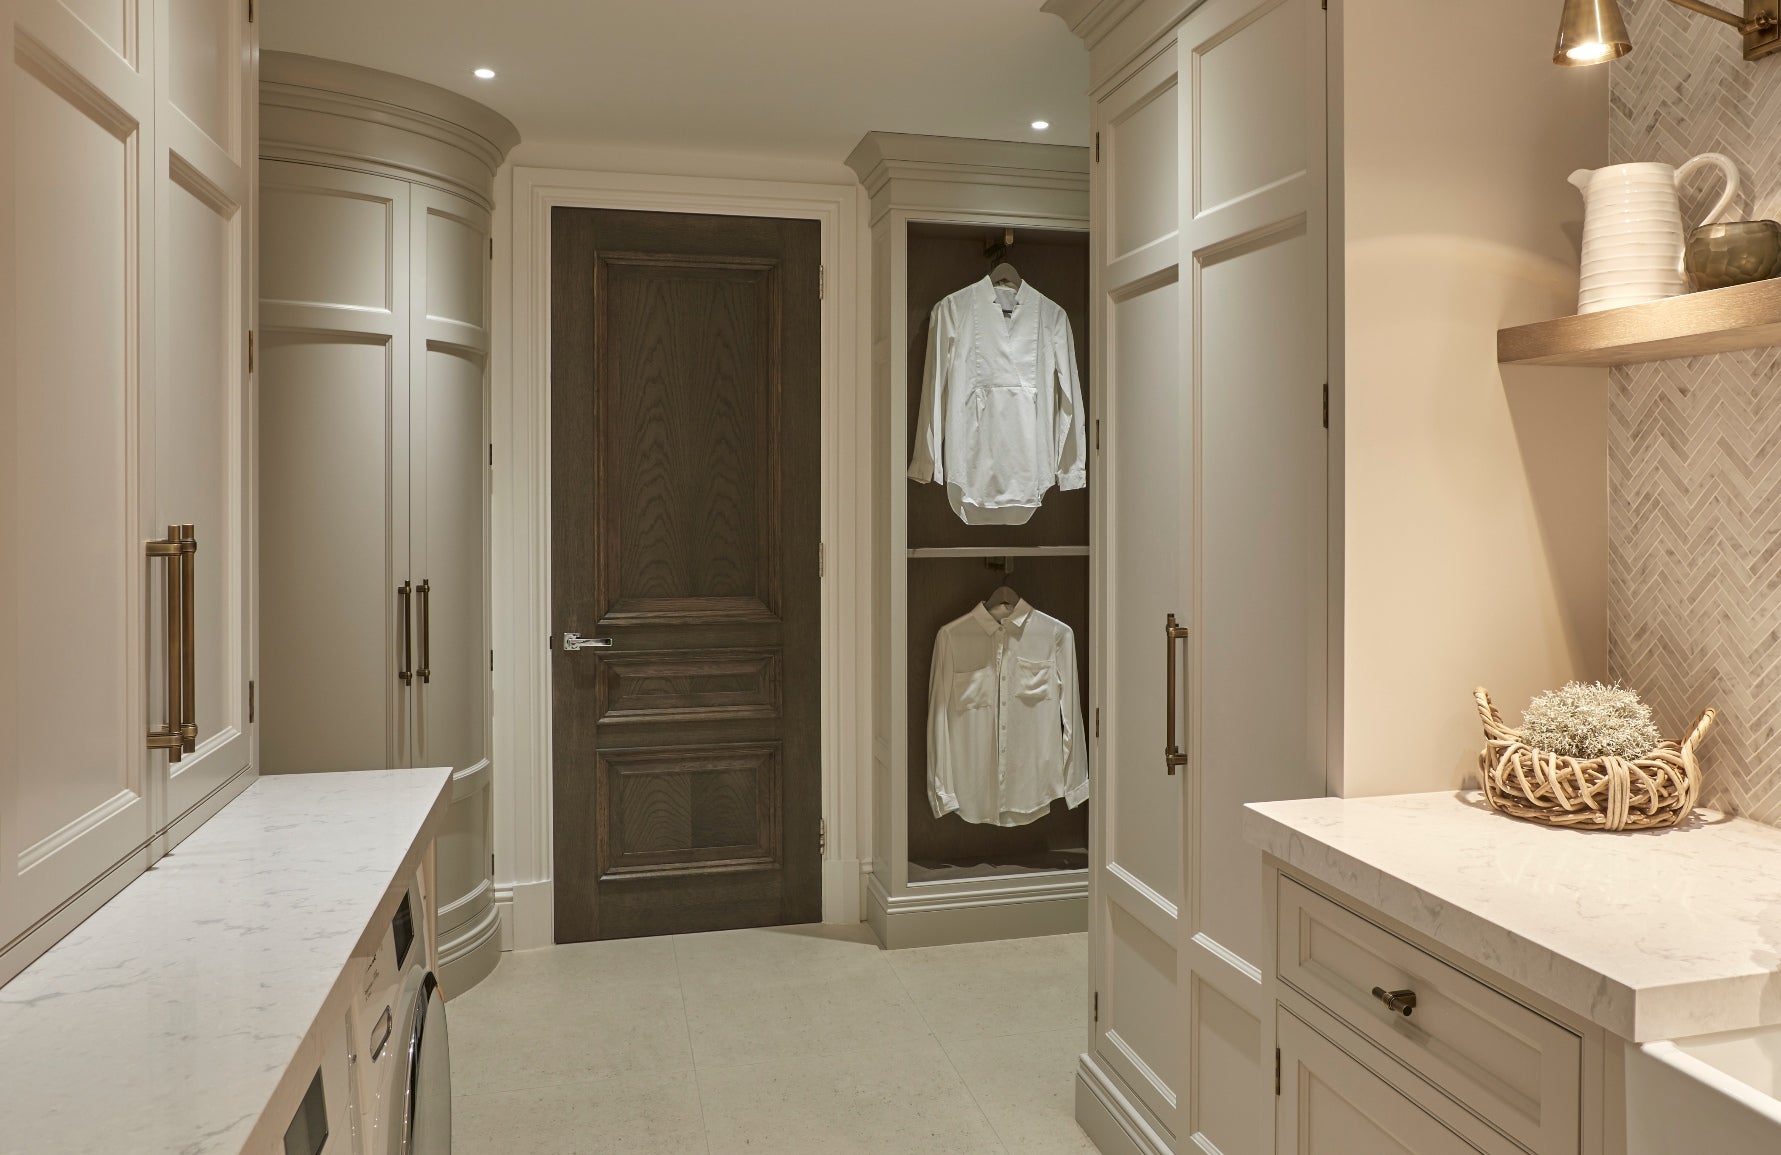 Utility Room Ideas & Designs to Maximise Your Room | LuxDeco